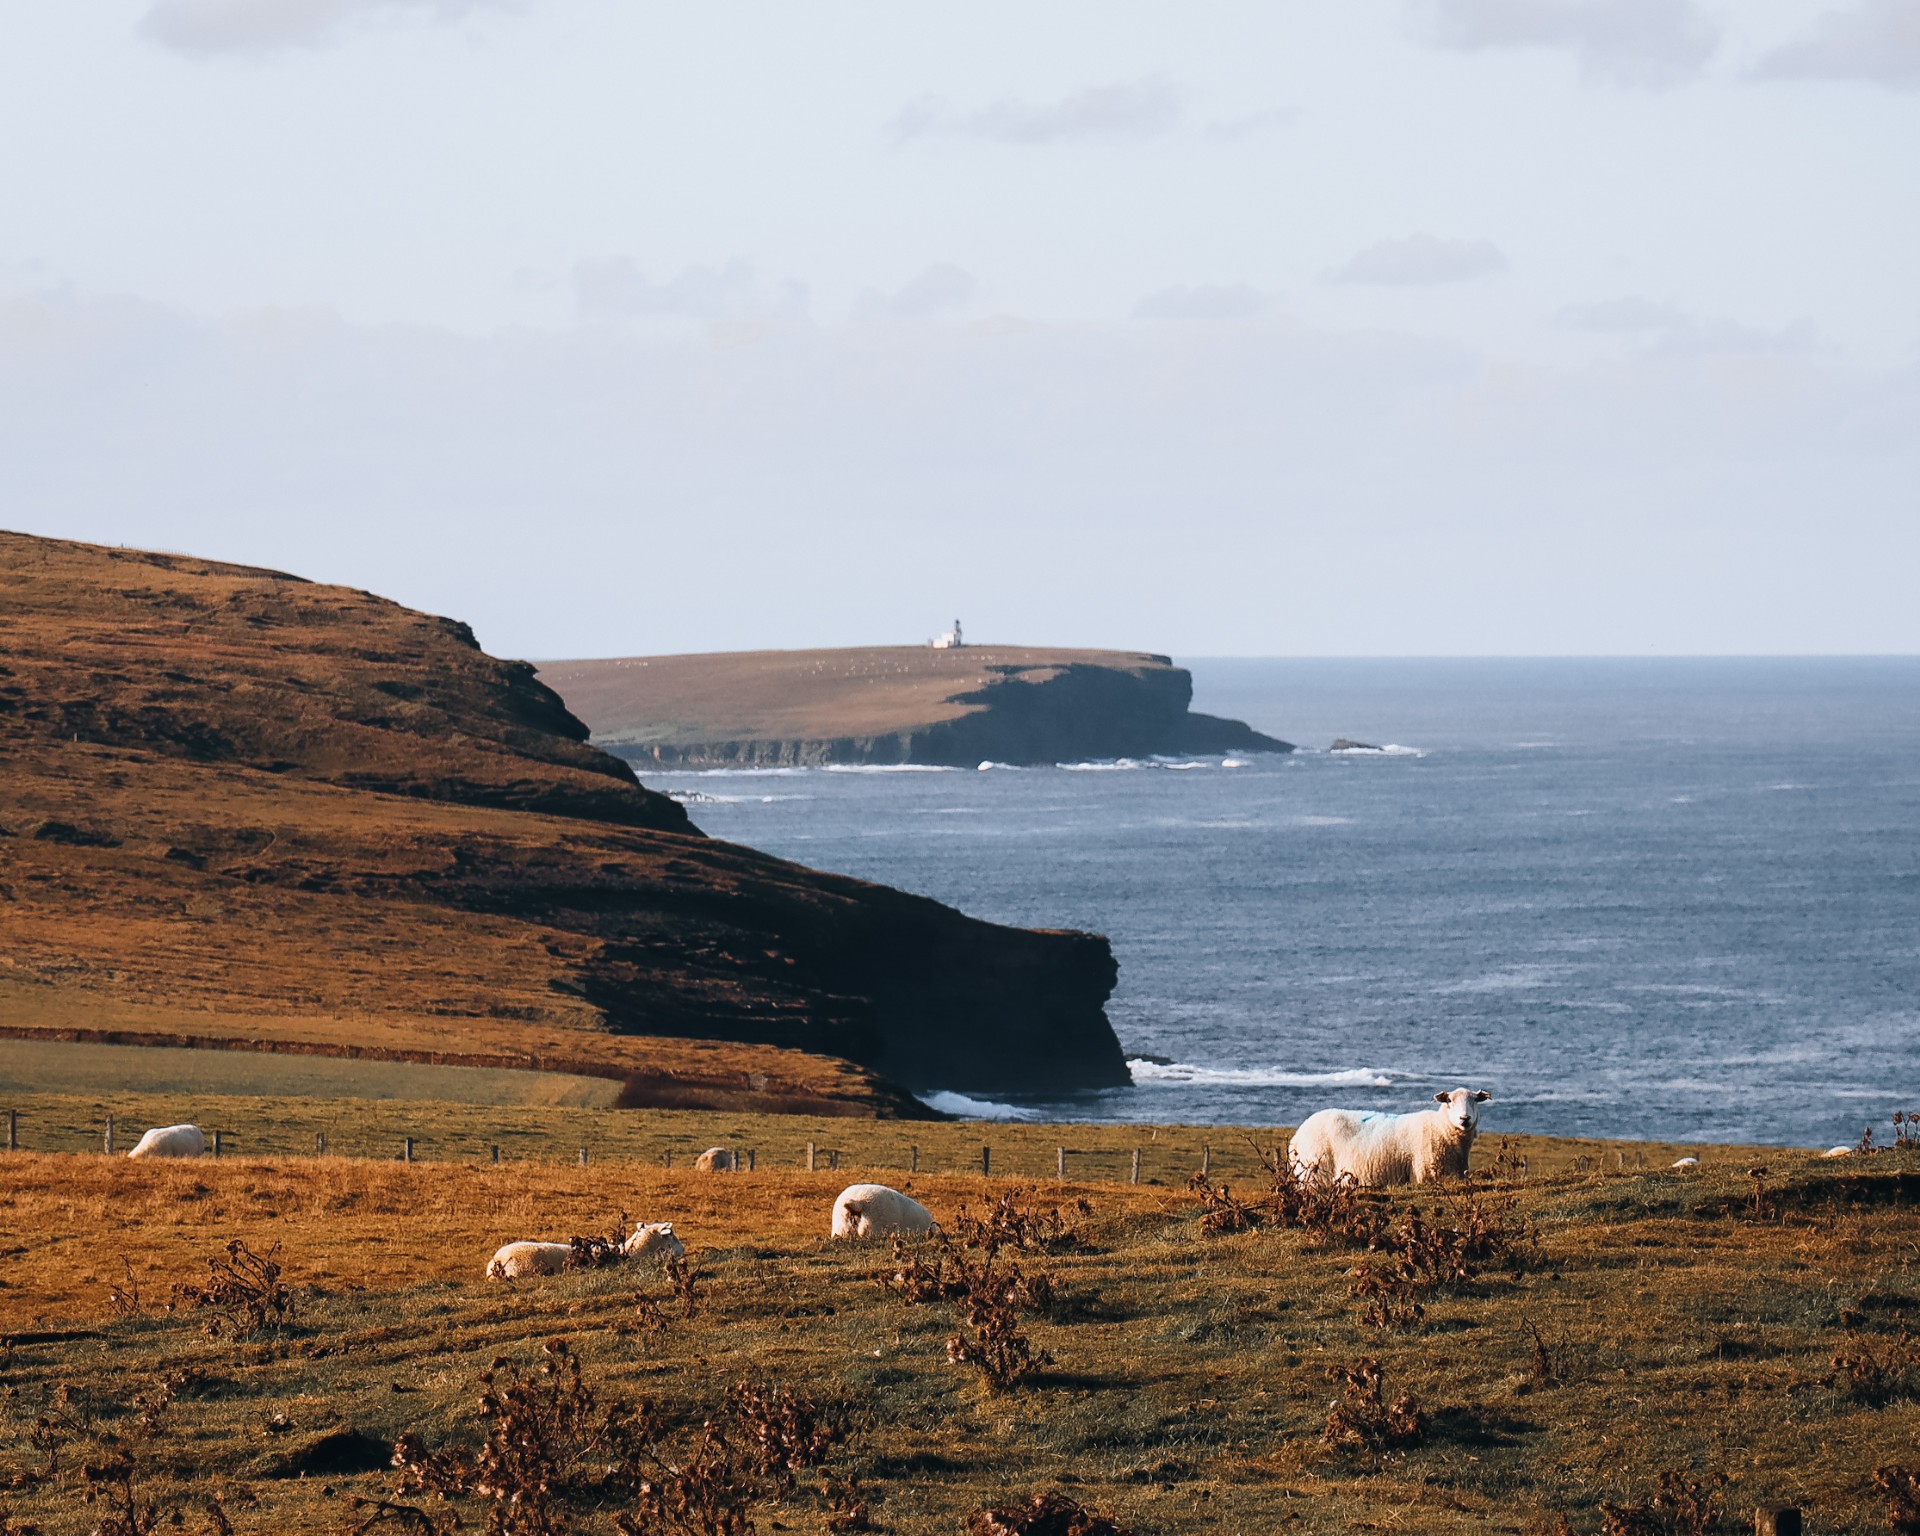 The view towards the Brough of Birsay from Costa Head.